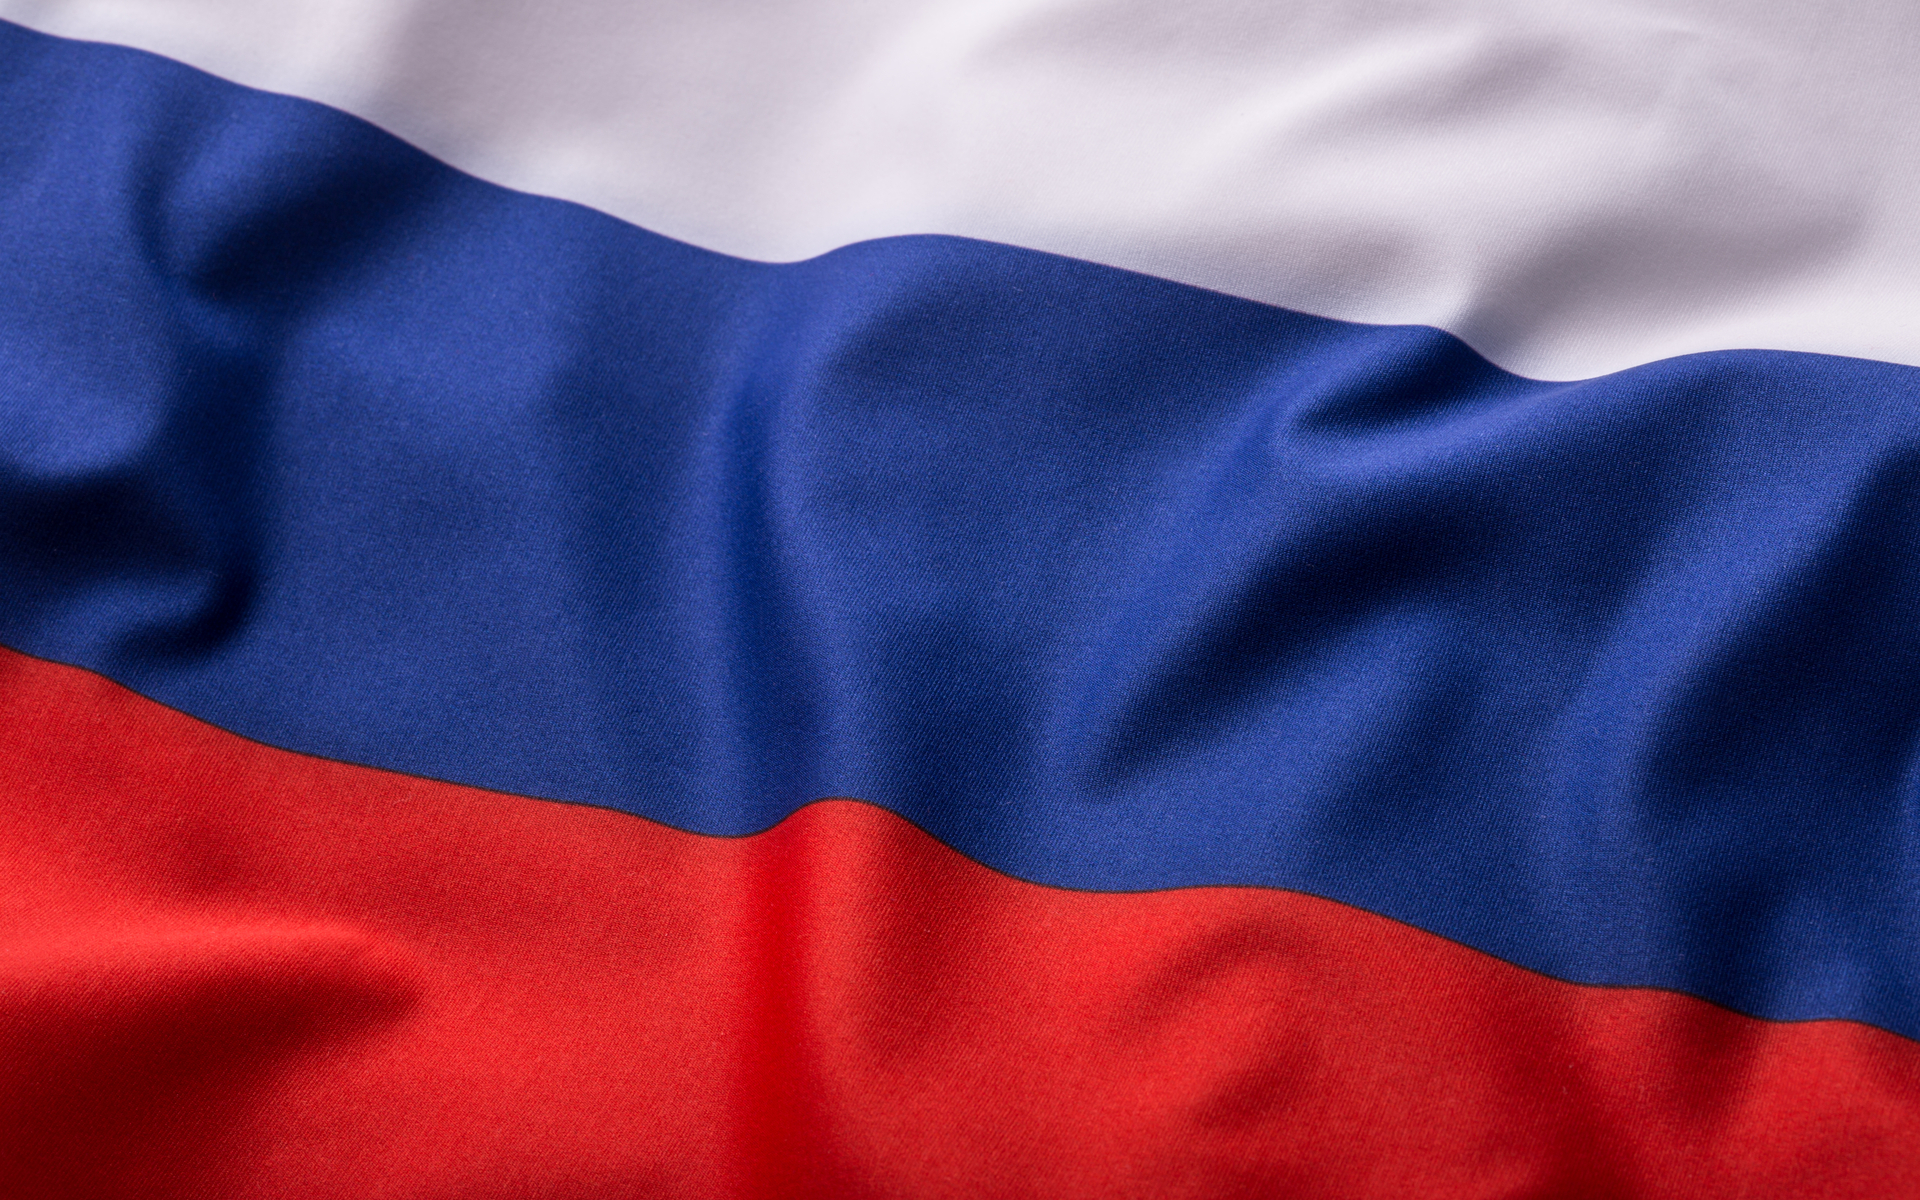 Russia to Invest in Blockchain, Potential Benefit Valued at $17.5B